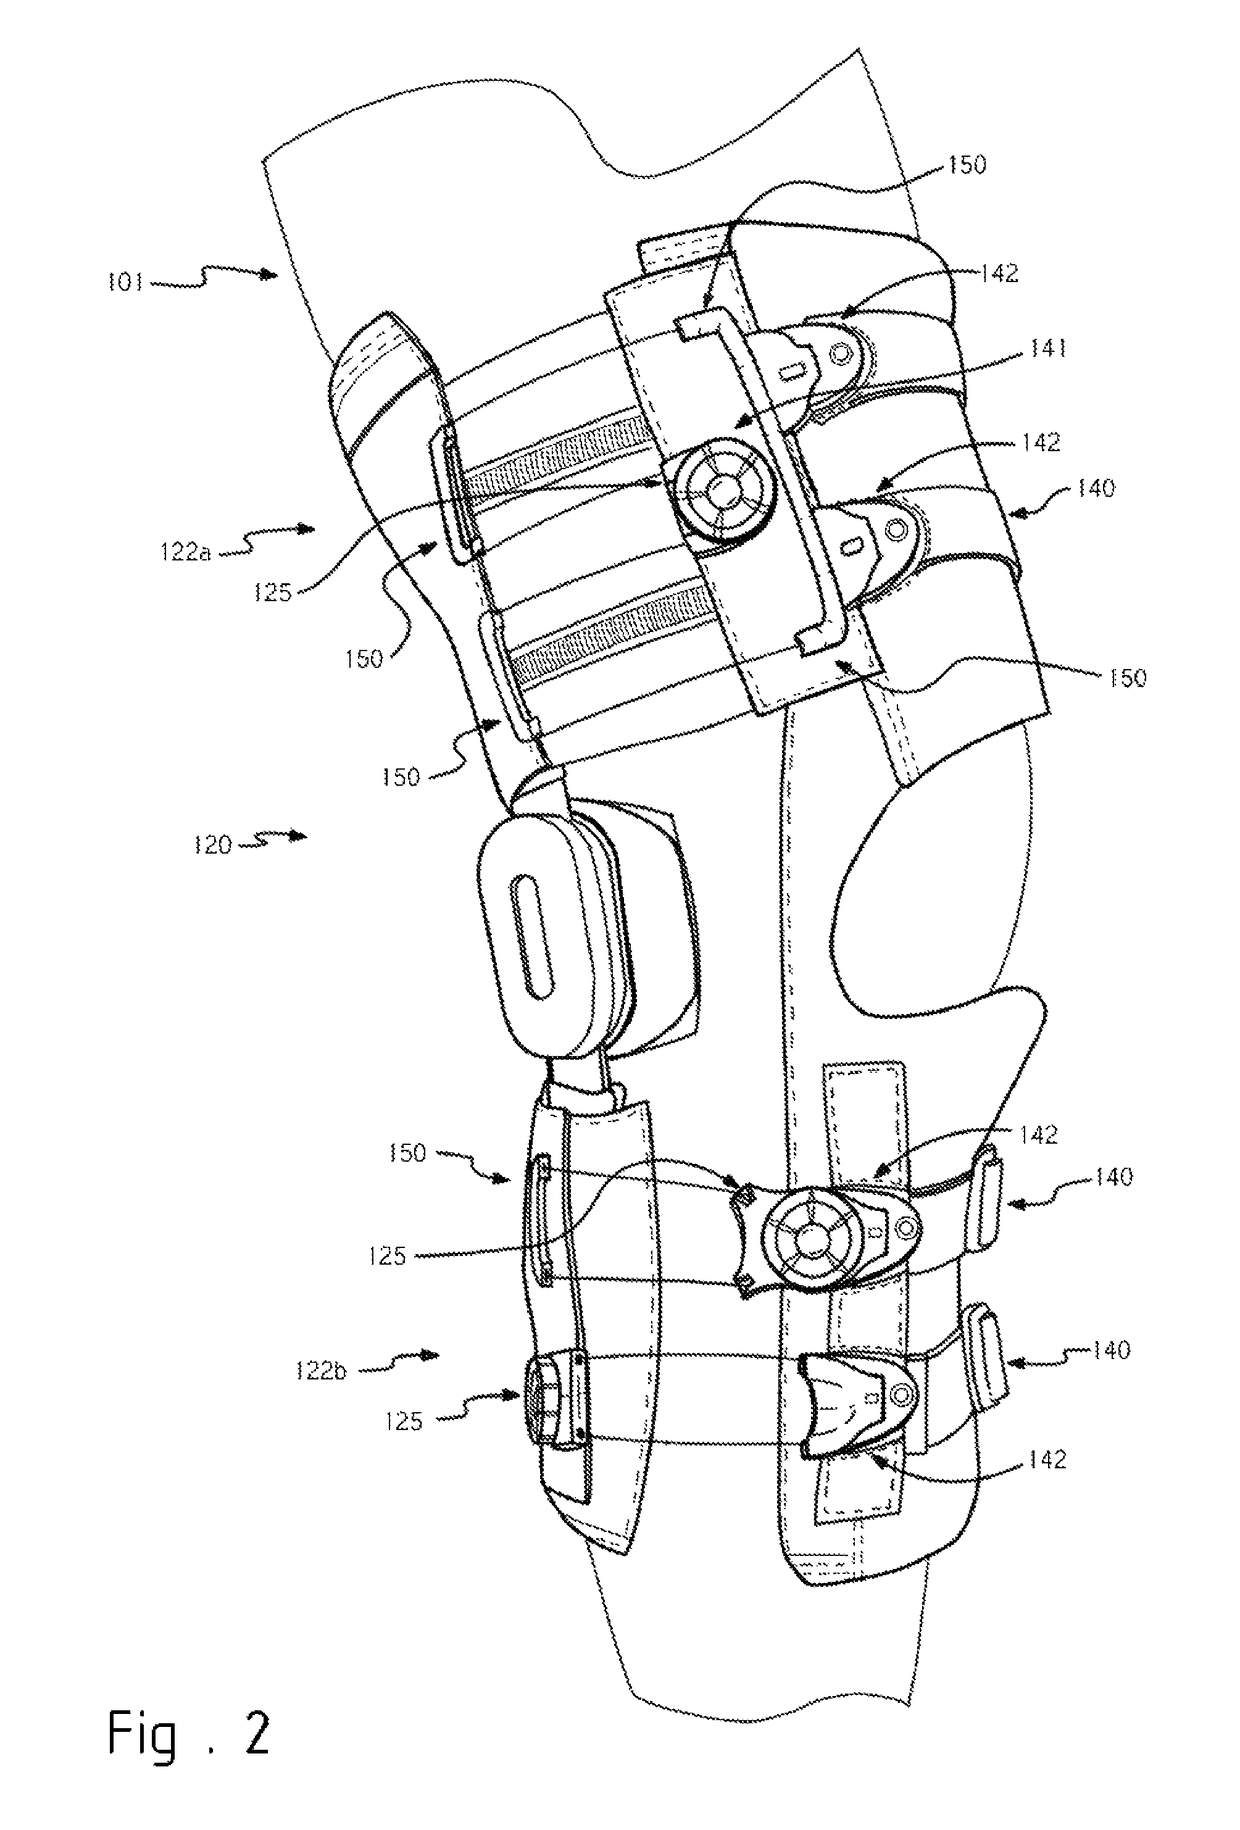 Methods and devices for providing automatic closure of prosthetics and orthotics